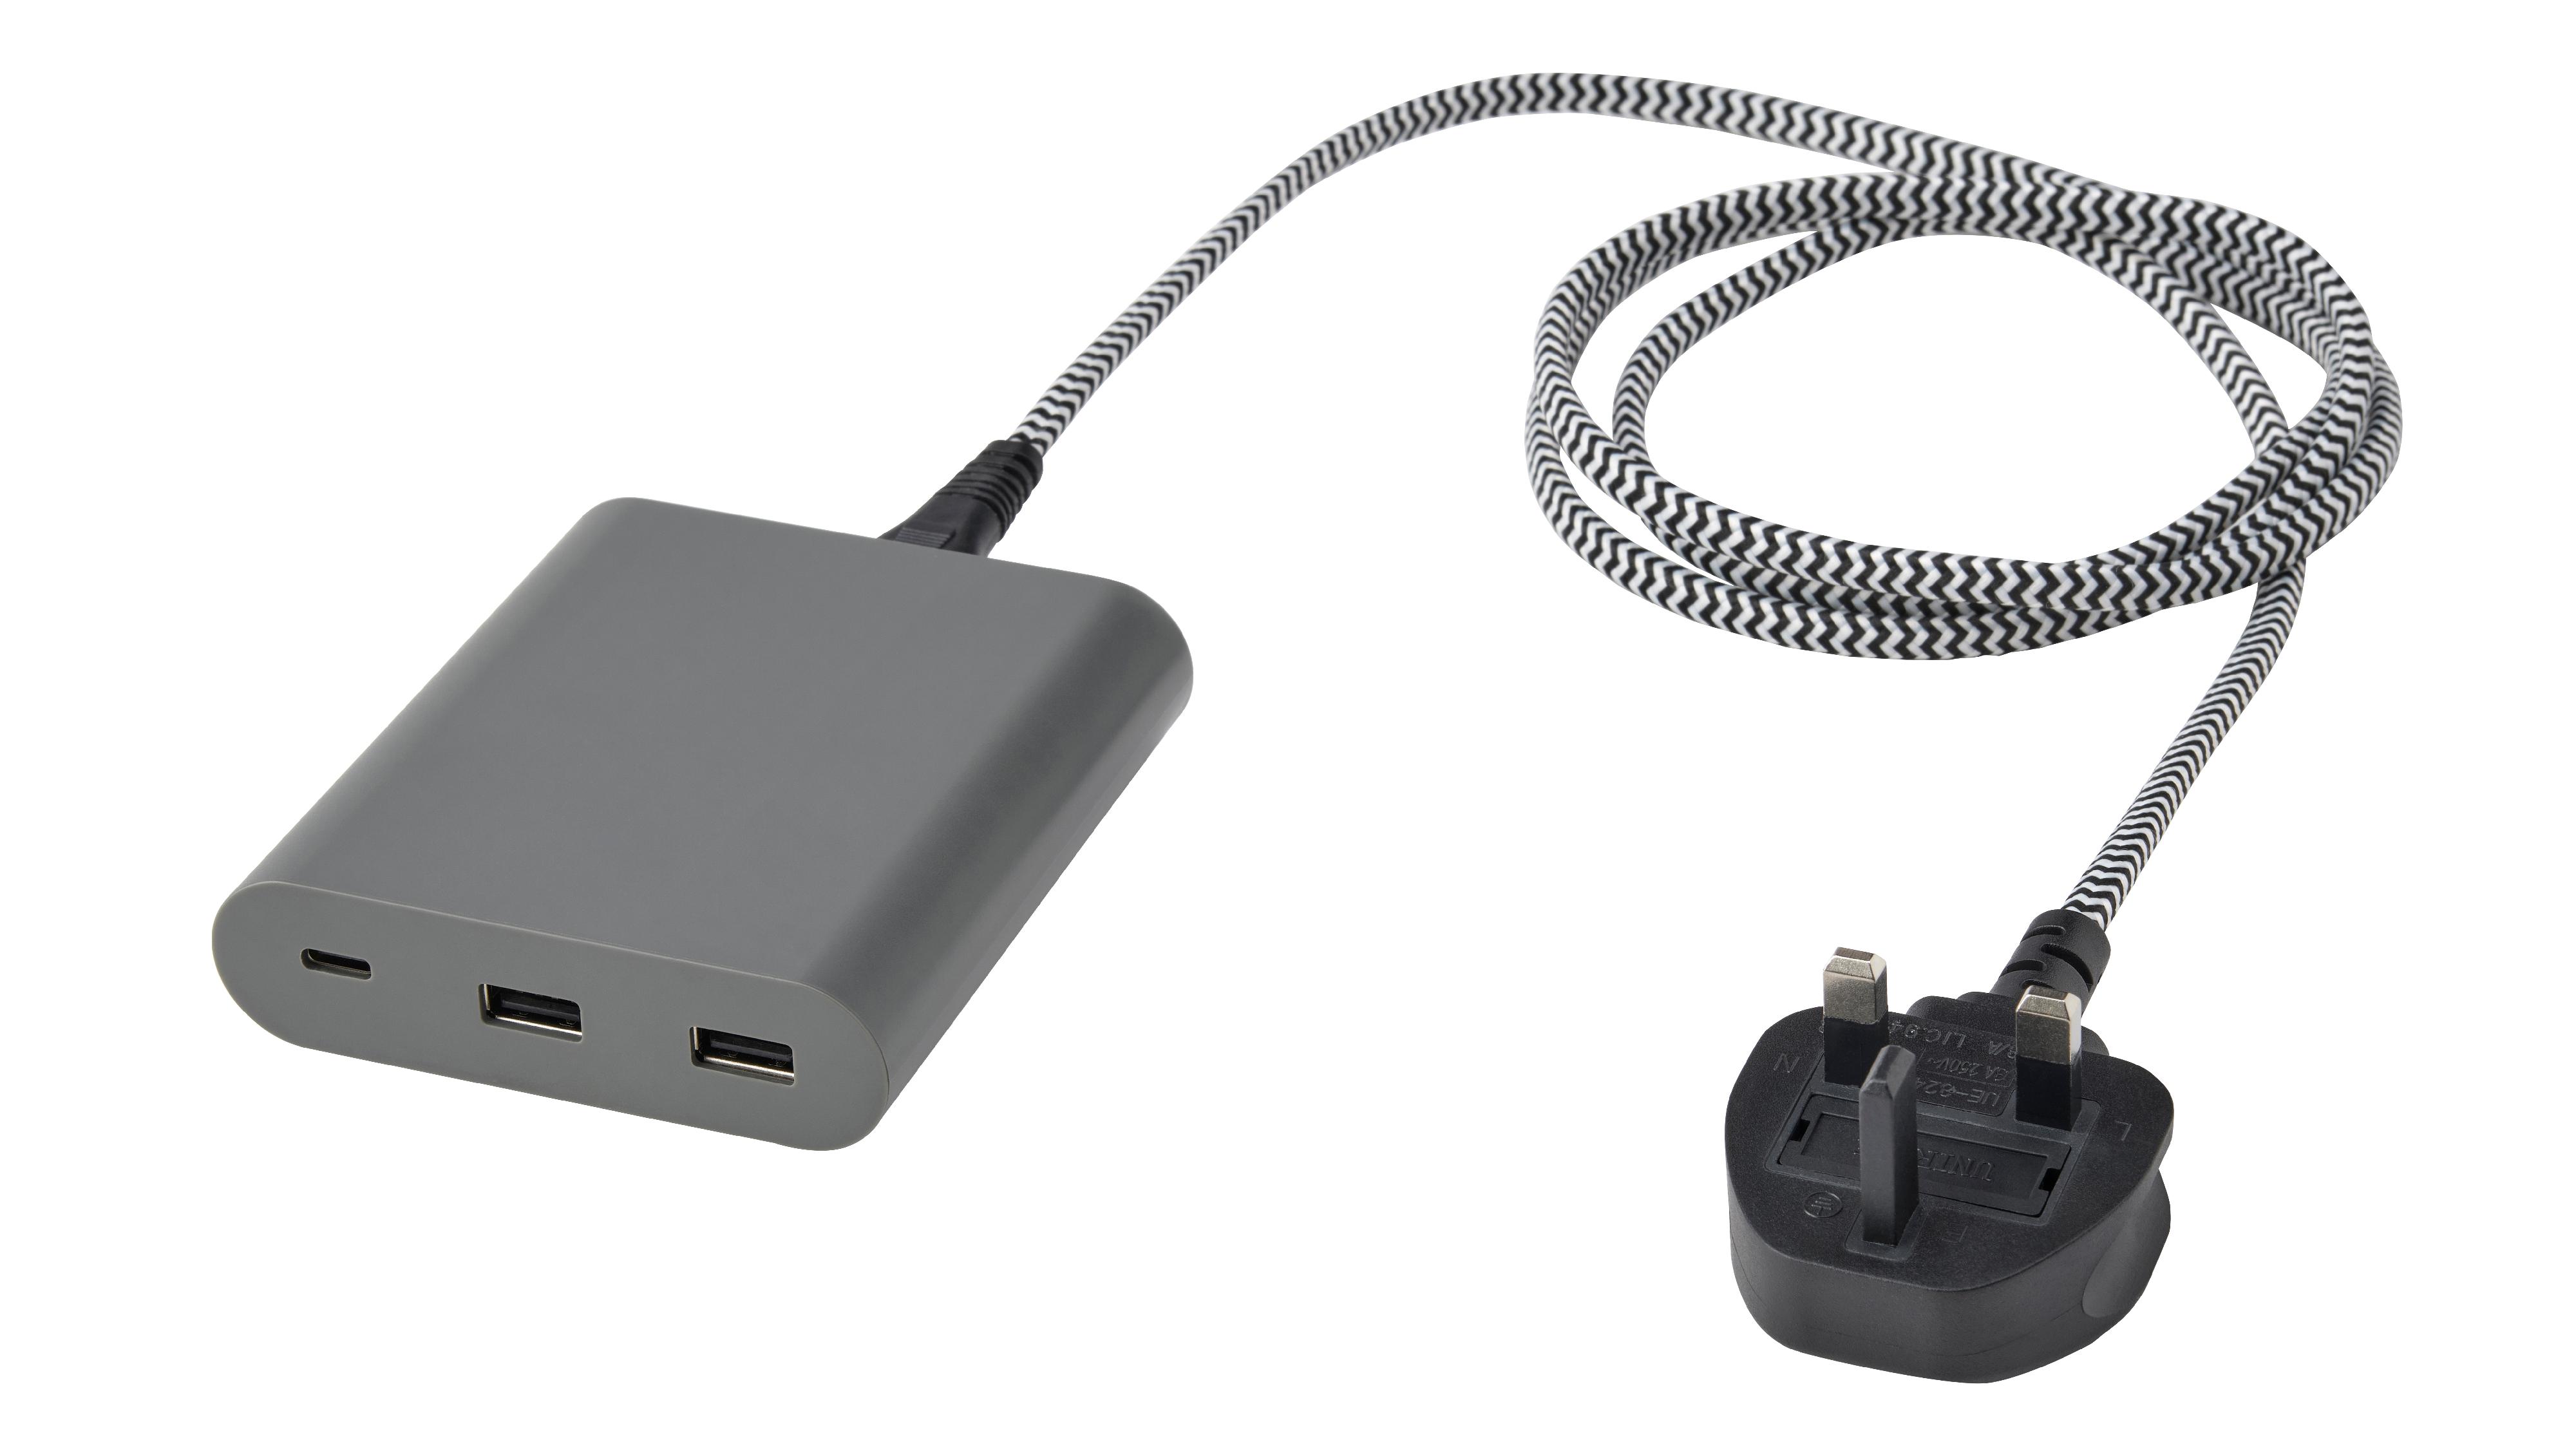 The Electrical and Mechanical Services Department today (January 10) urged the public to stop using a model of IKEA ÅSKSTORM 40W USB charger. Photo shows the charger.